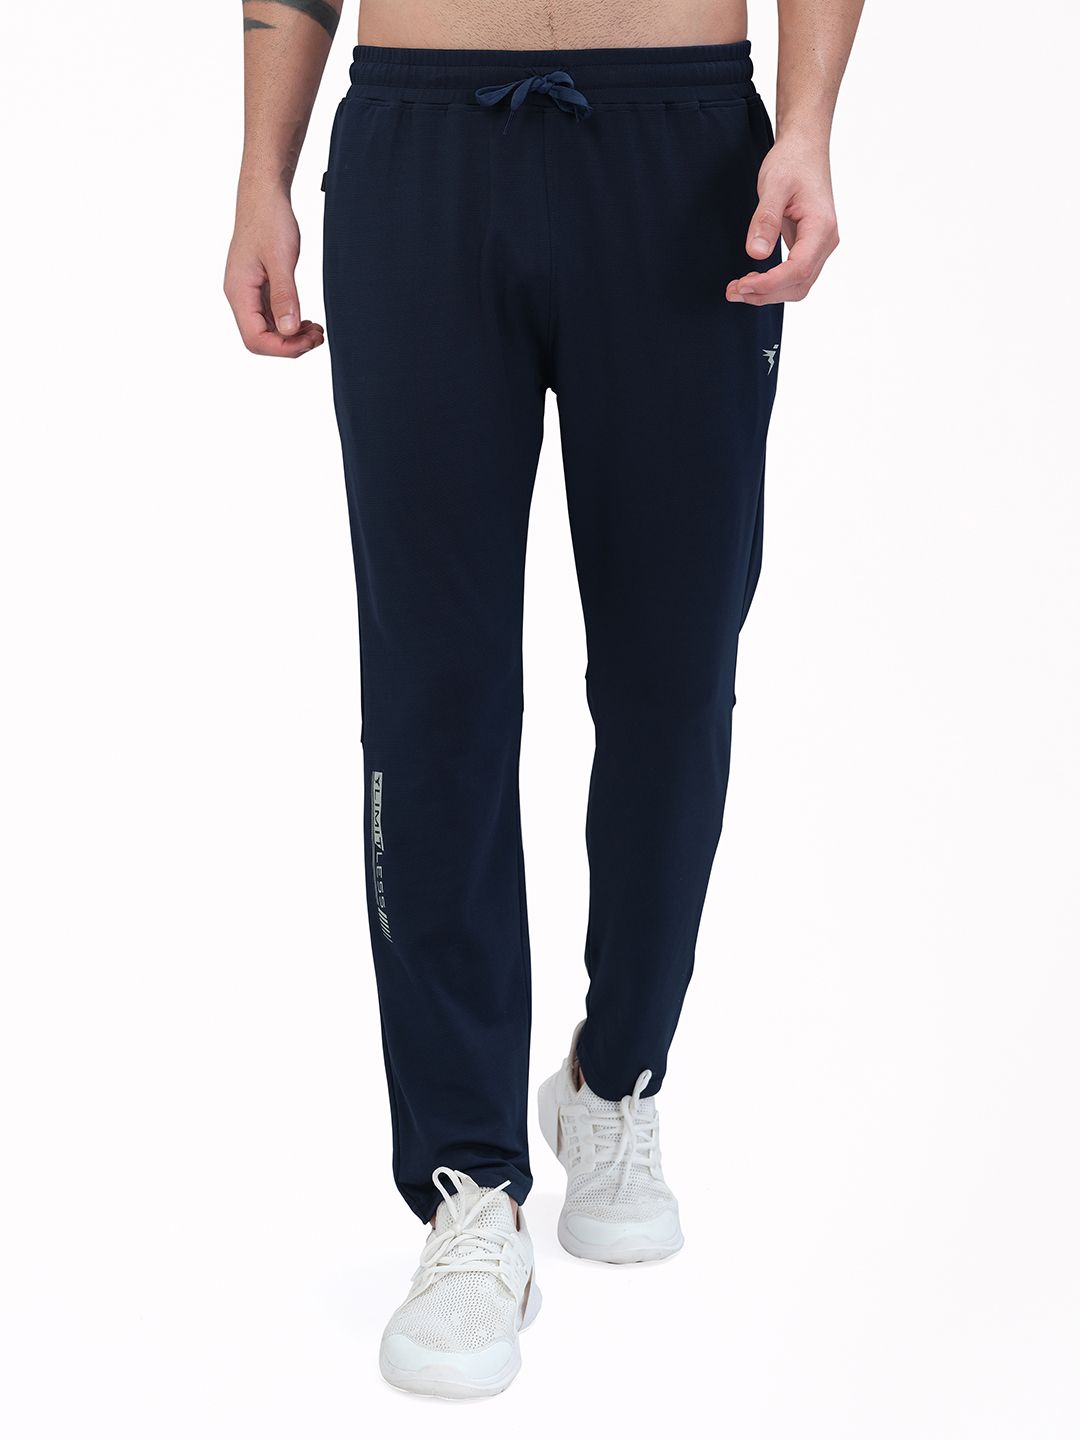 Buy Men Navy Solid Trackpant From Fancode Shop.